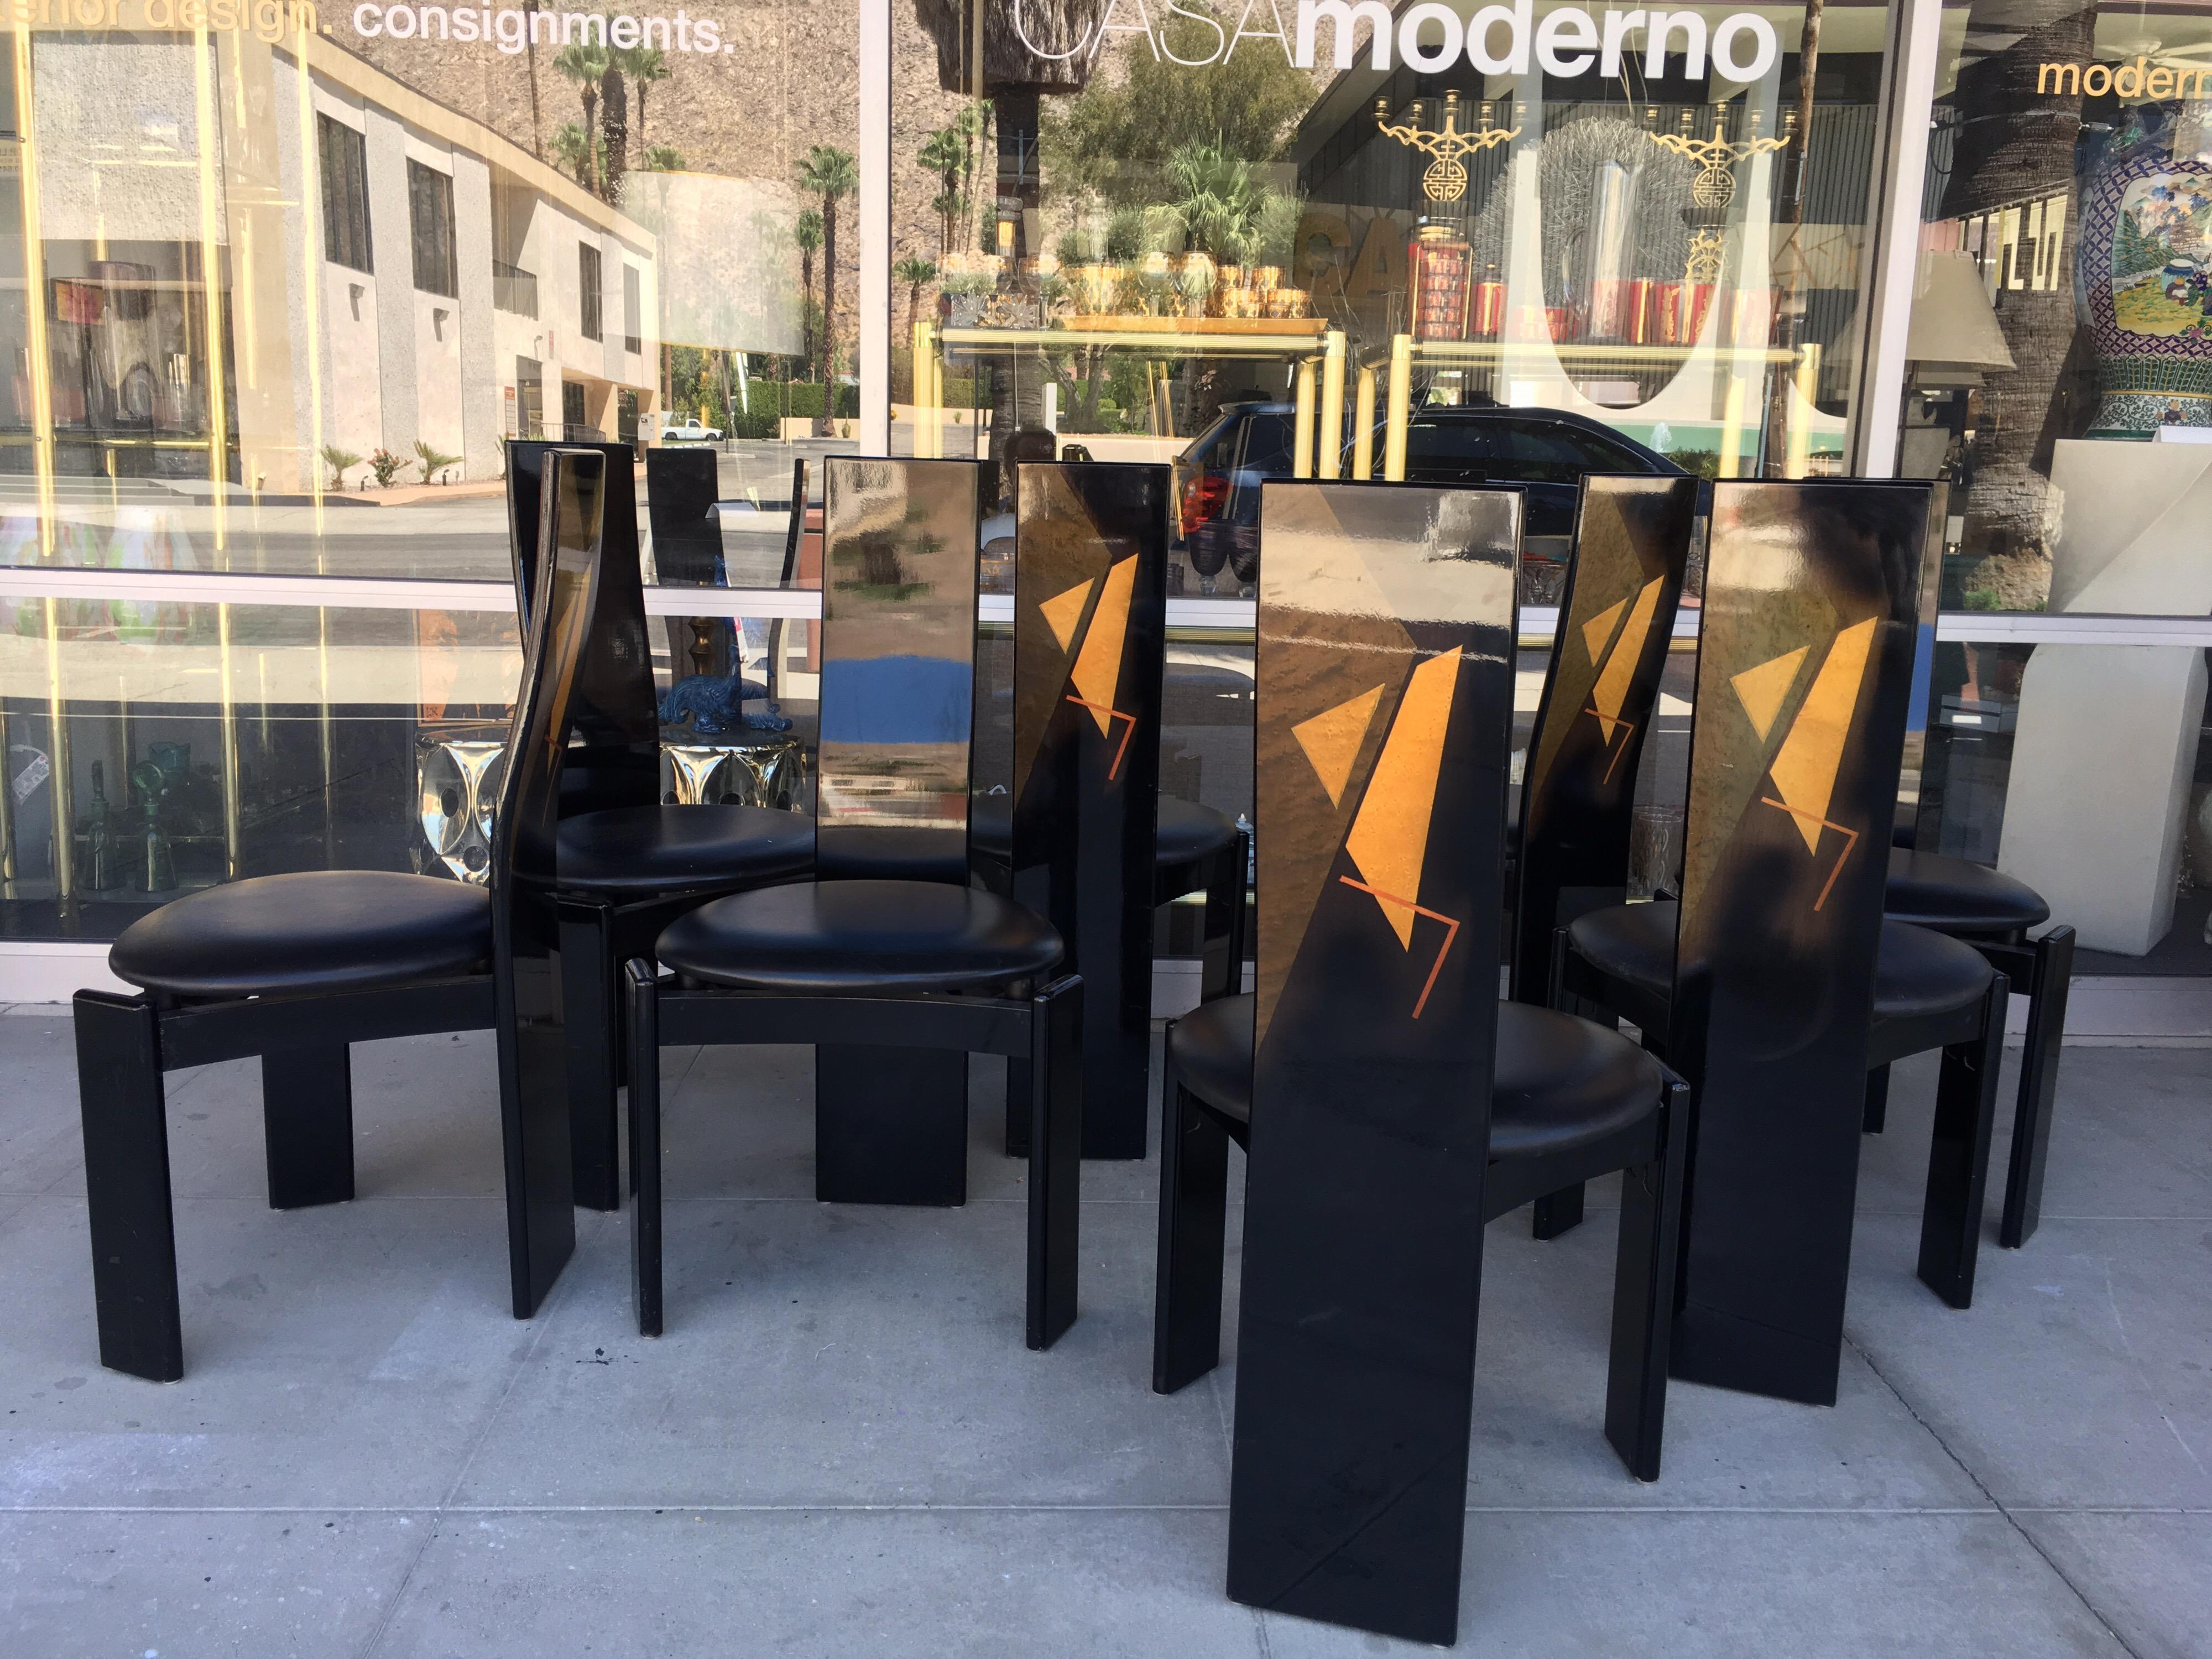 These very chic vintage Italian modern dining chairs were made in the 1980s in a cool Post Modern style at the time of the Memphis craze in Italy. Set of 8 black lacquered wood with painted backs that have a graphic design. Original leather seats